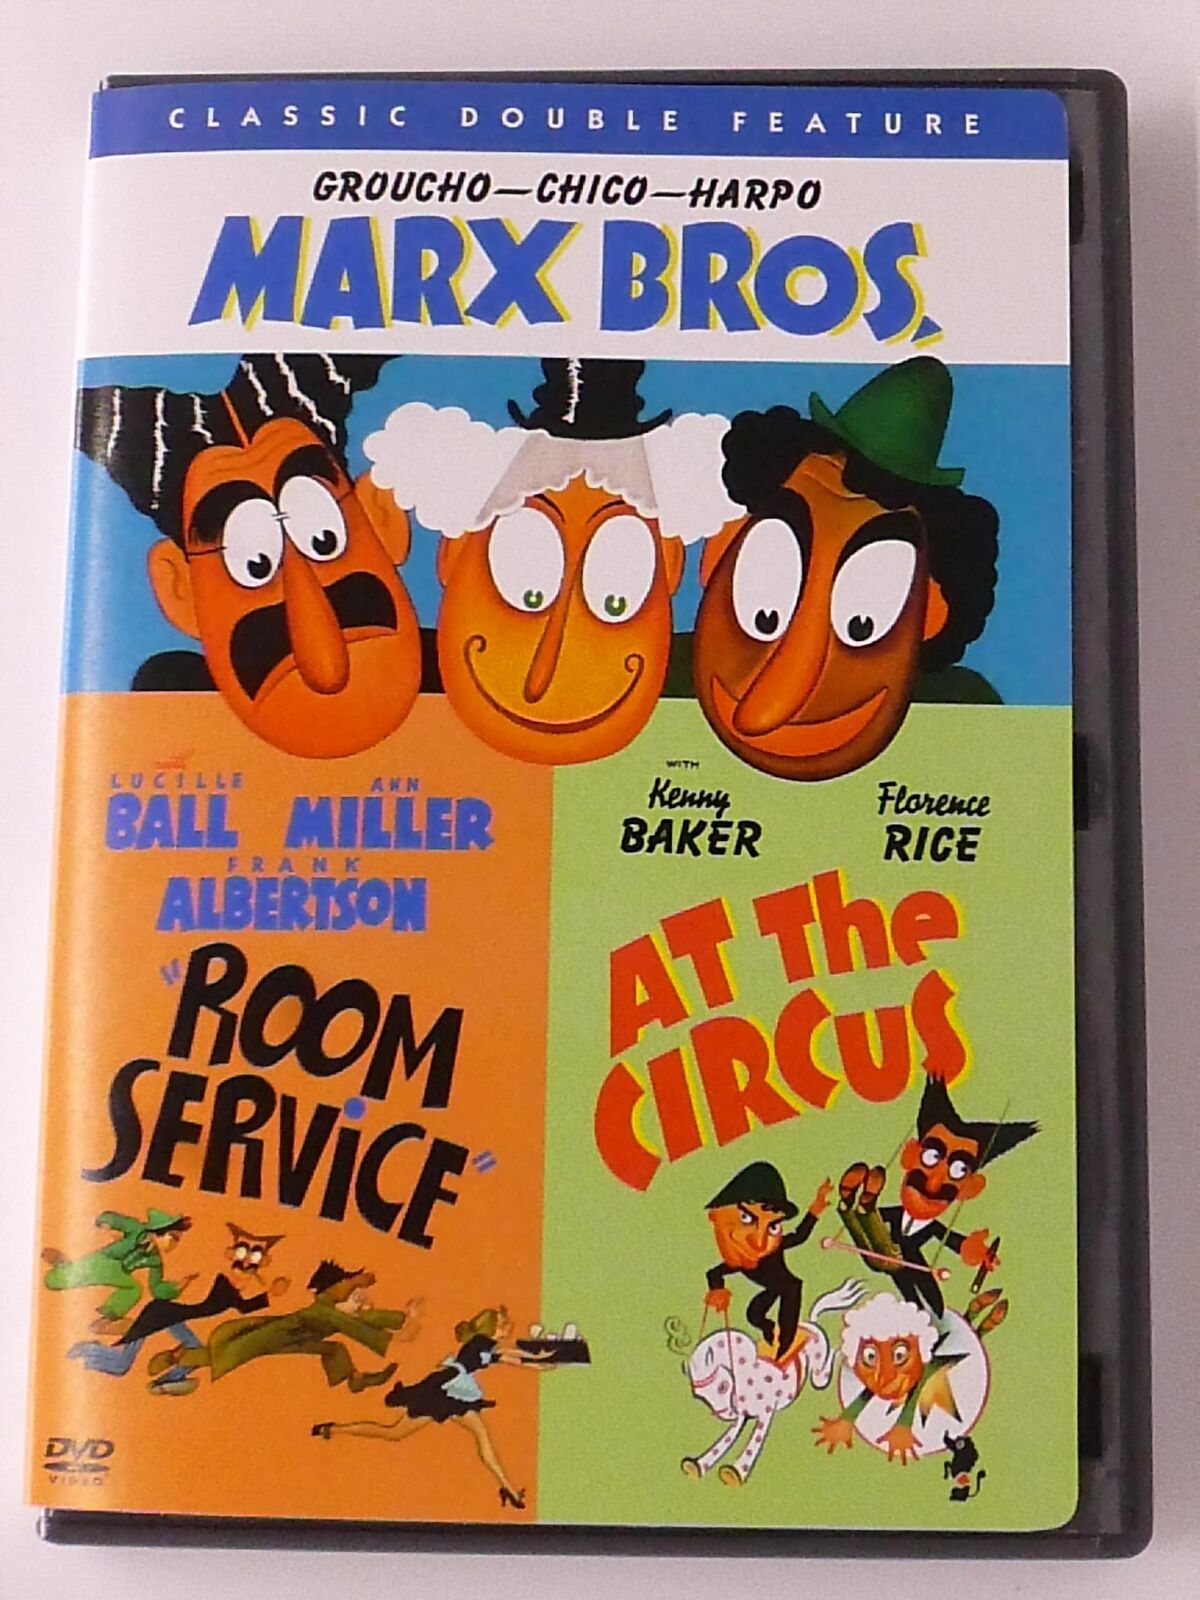 Marx Bros. - Room Service and At the Circus (DVD, double feature) - J0514